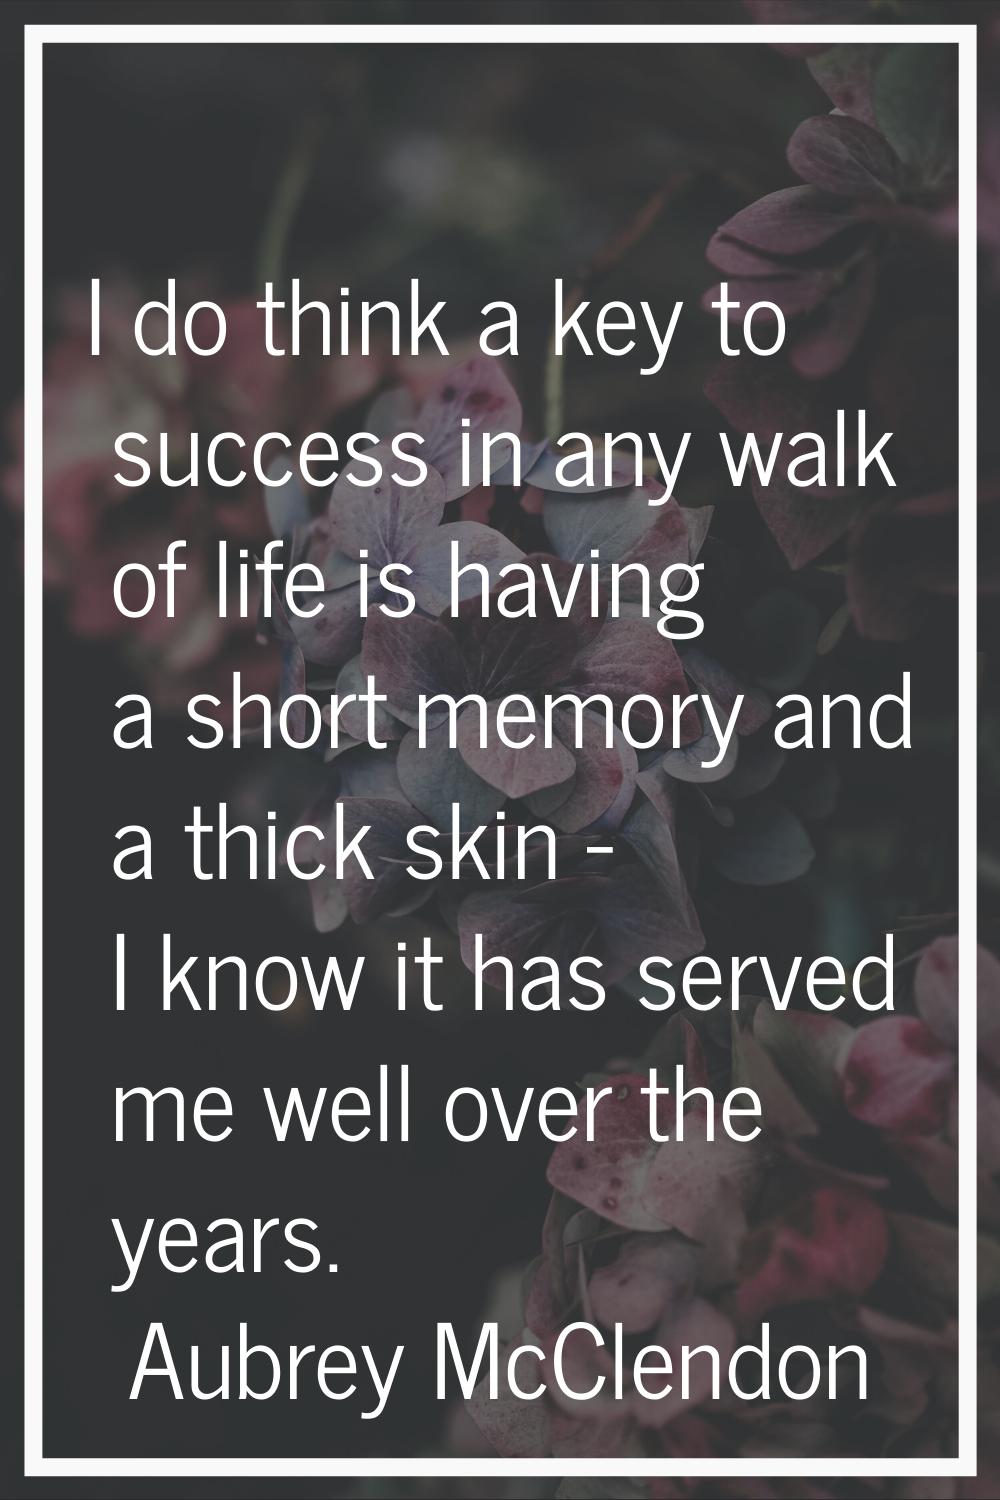 I do think a key to success in any walk of life is having a short memory and a thick skin - I know 